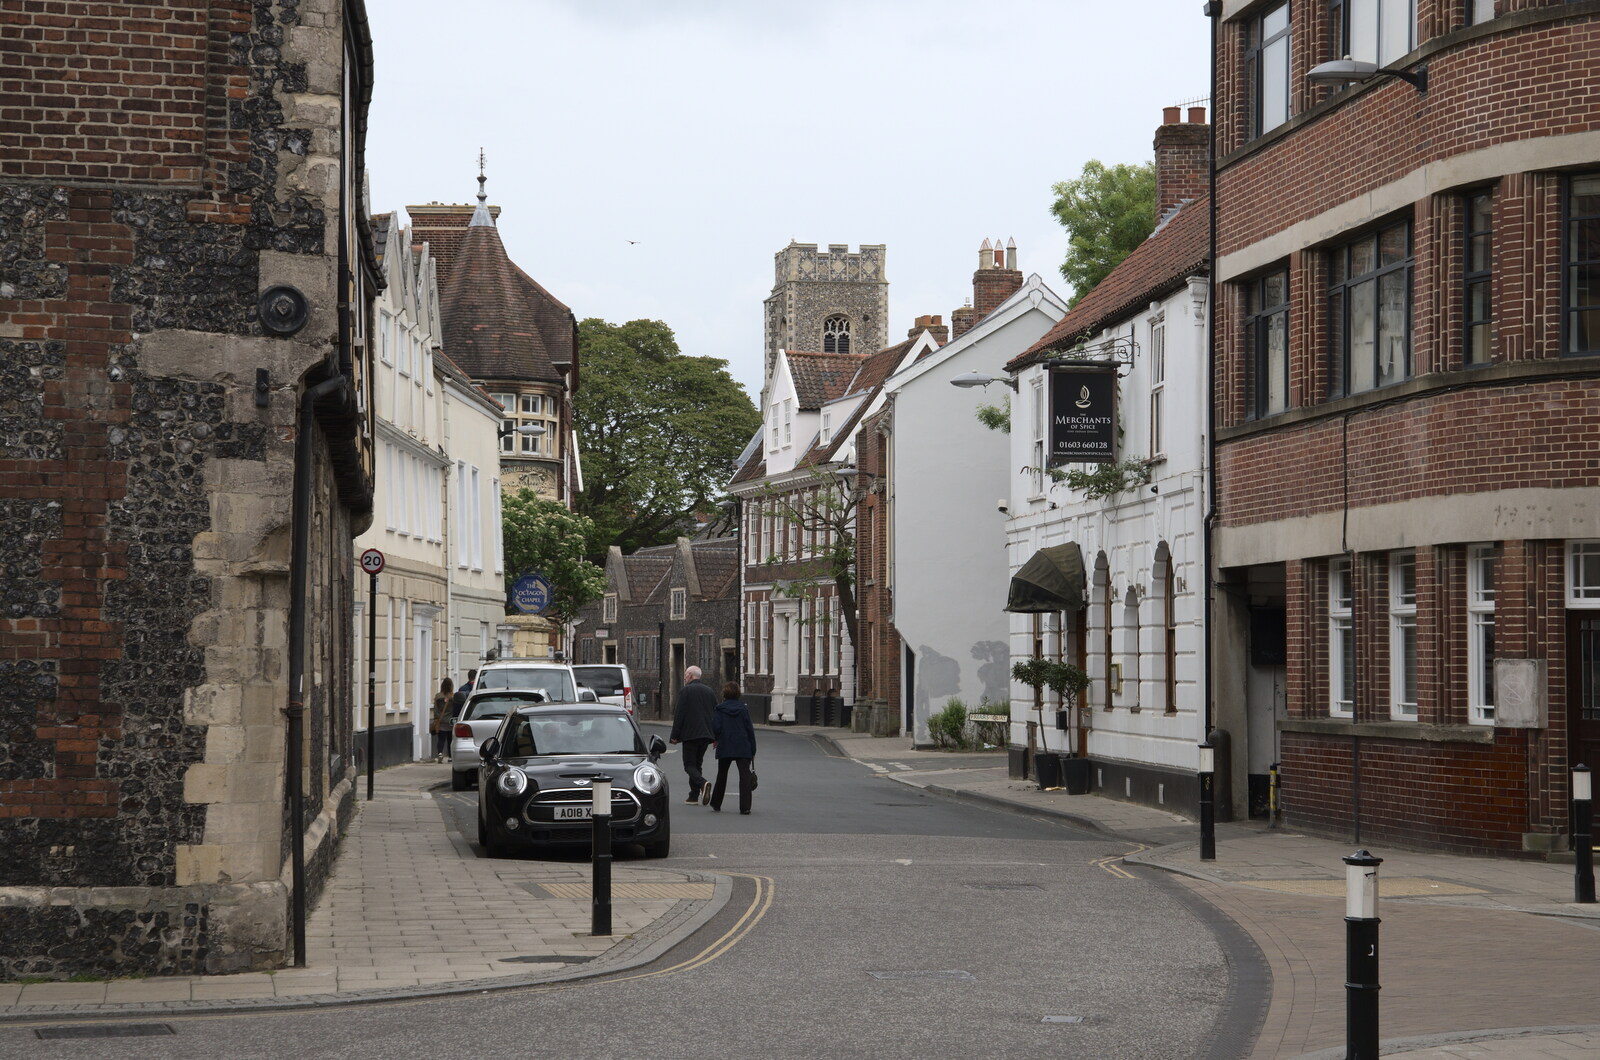 The end of Colegate from Discovering the Hidden City: Norwich, Norfolk - 23rd May 2022